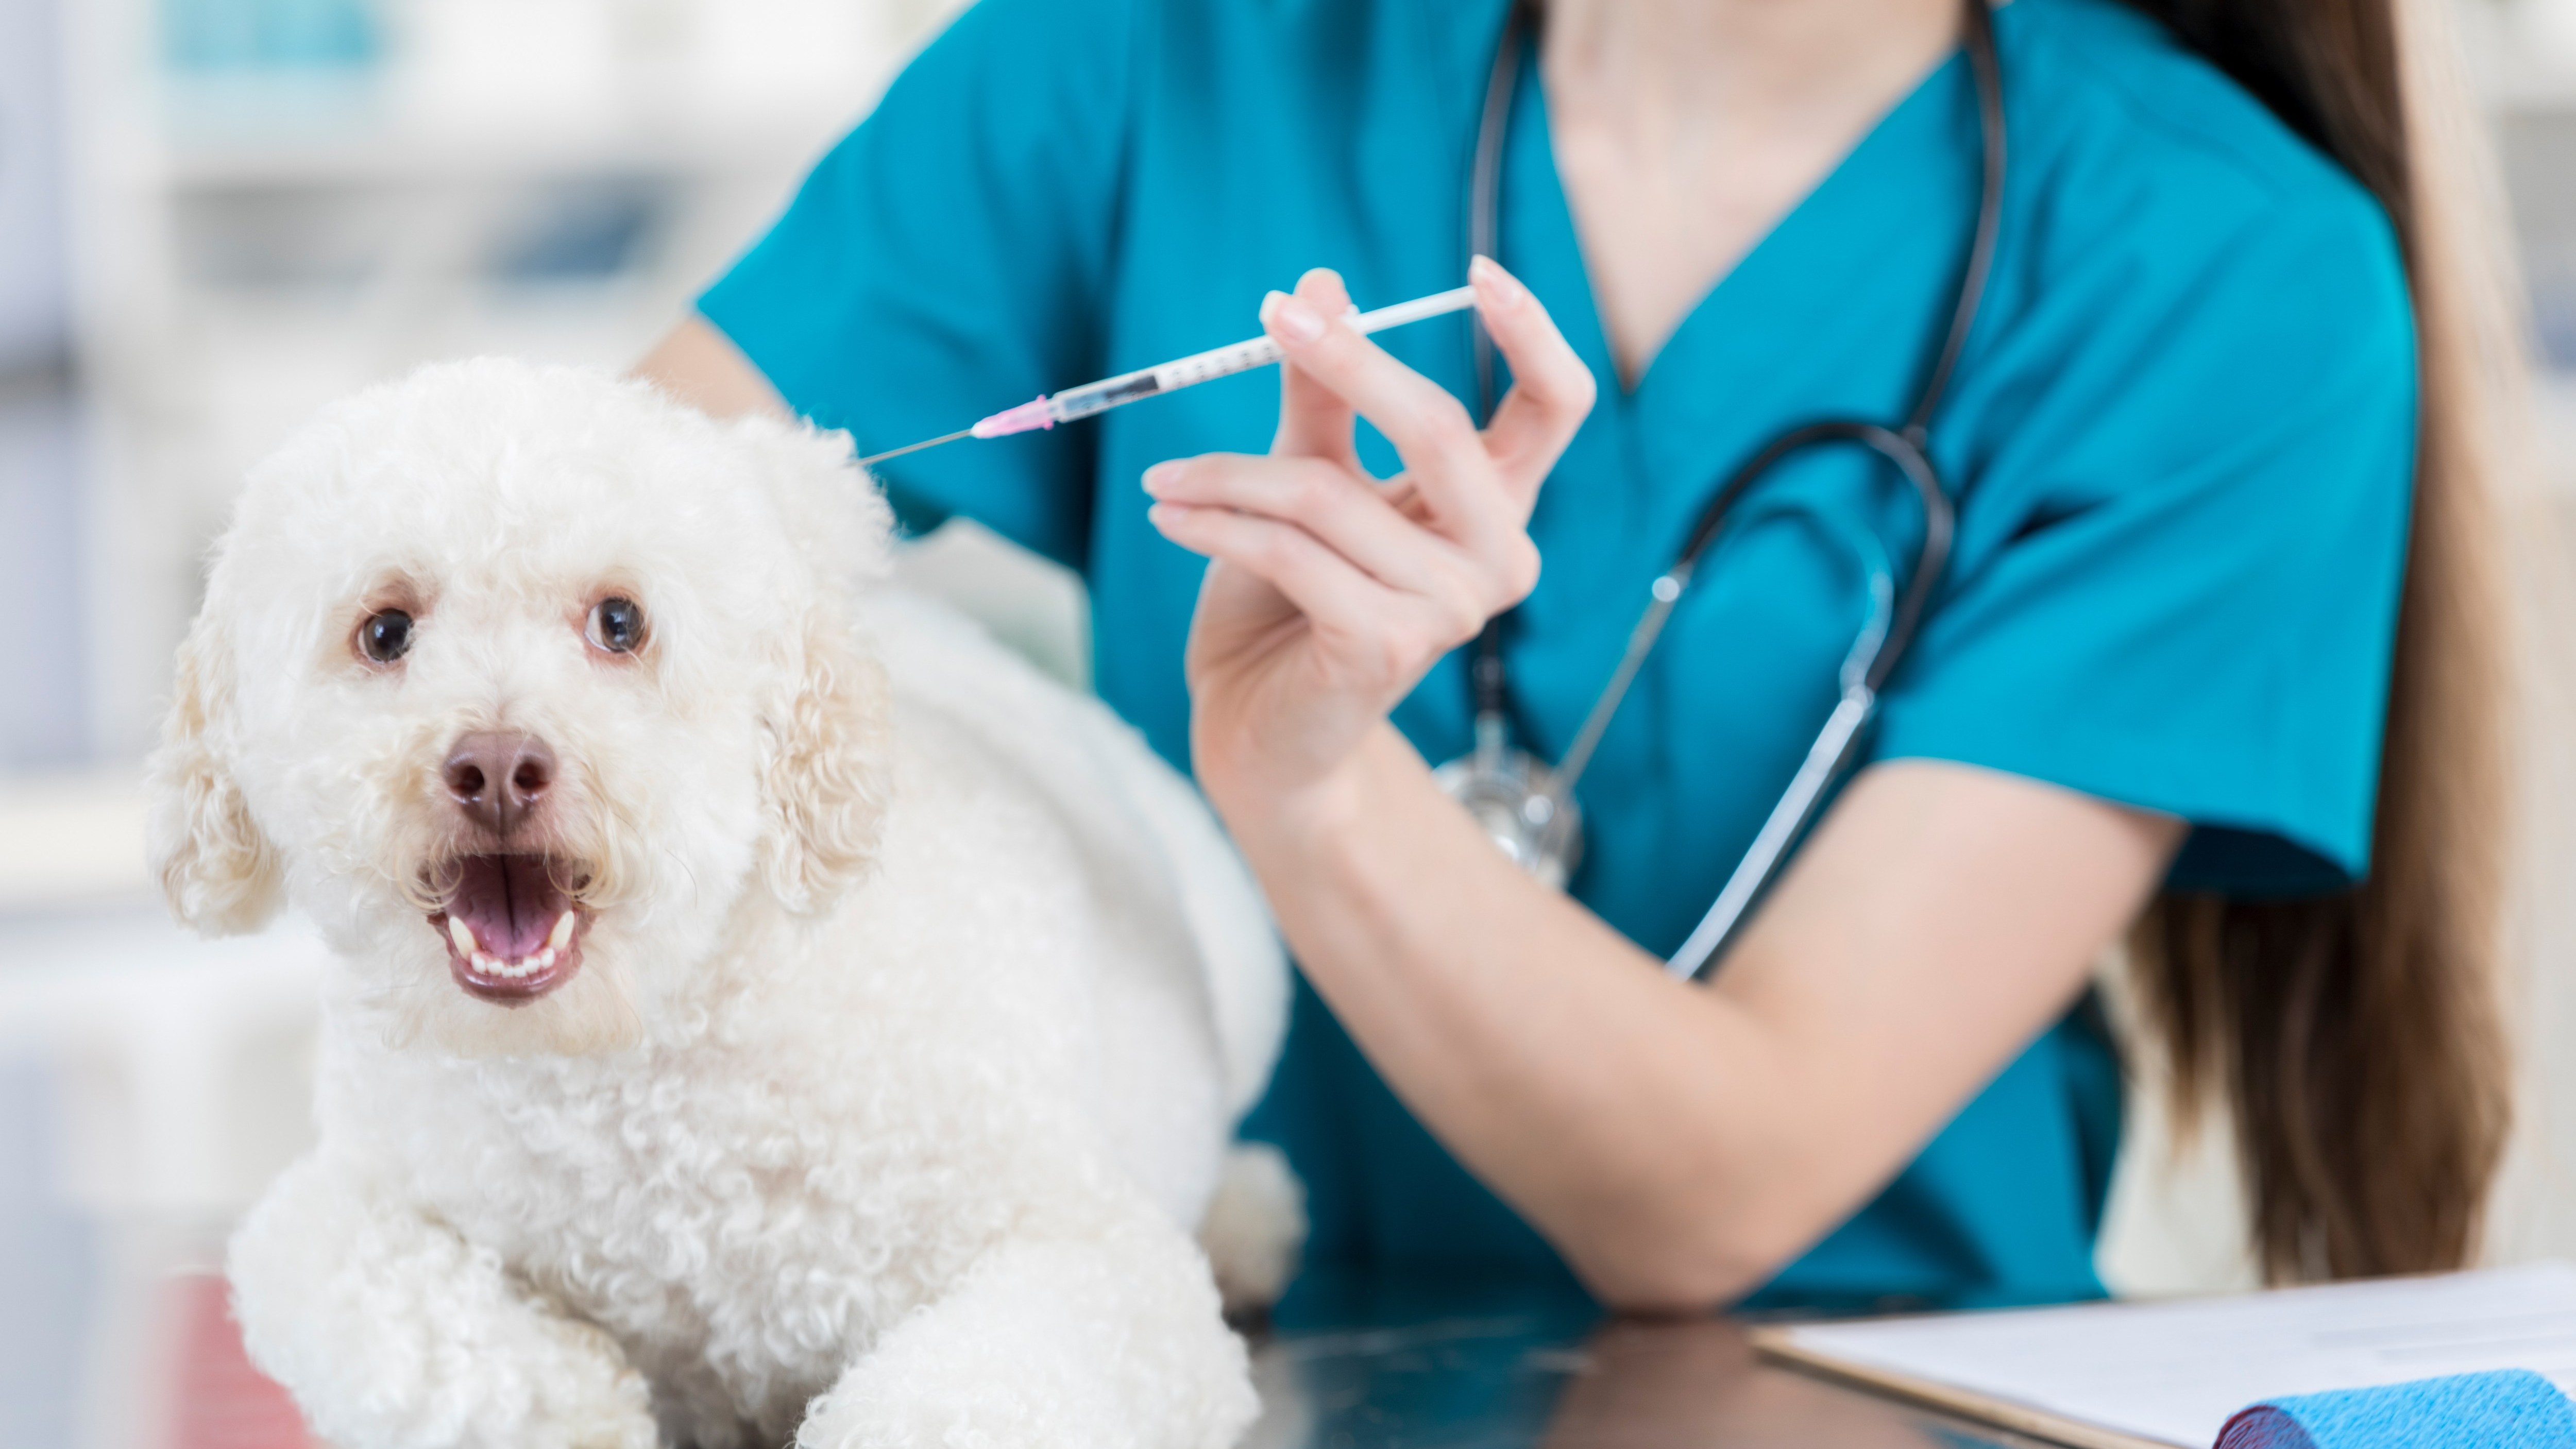 There have been growing concerns that pet owners may be overpaying for medicines